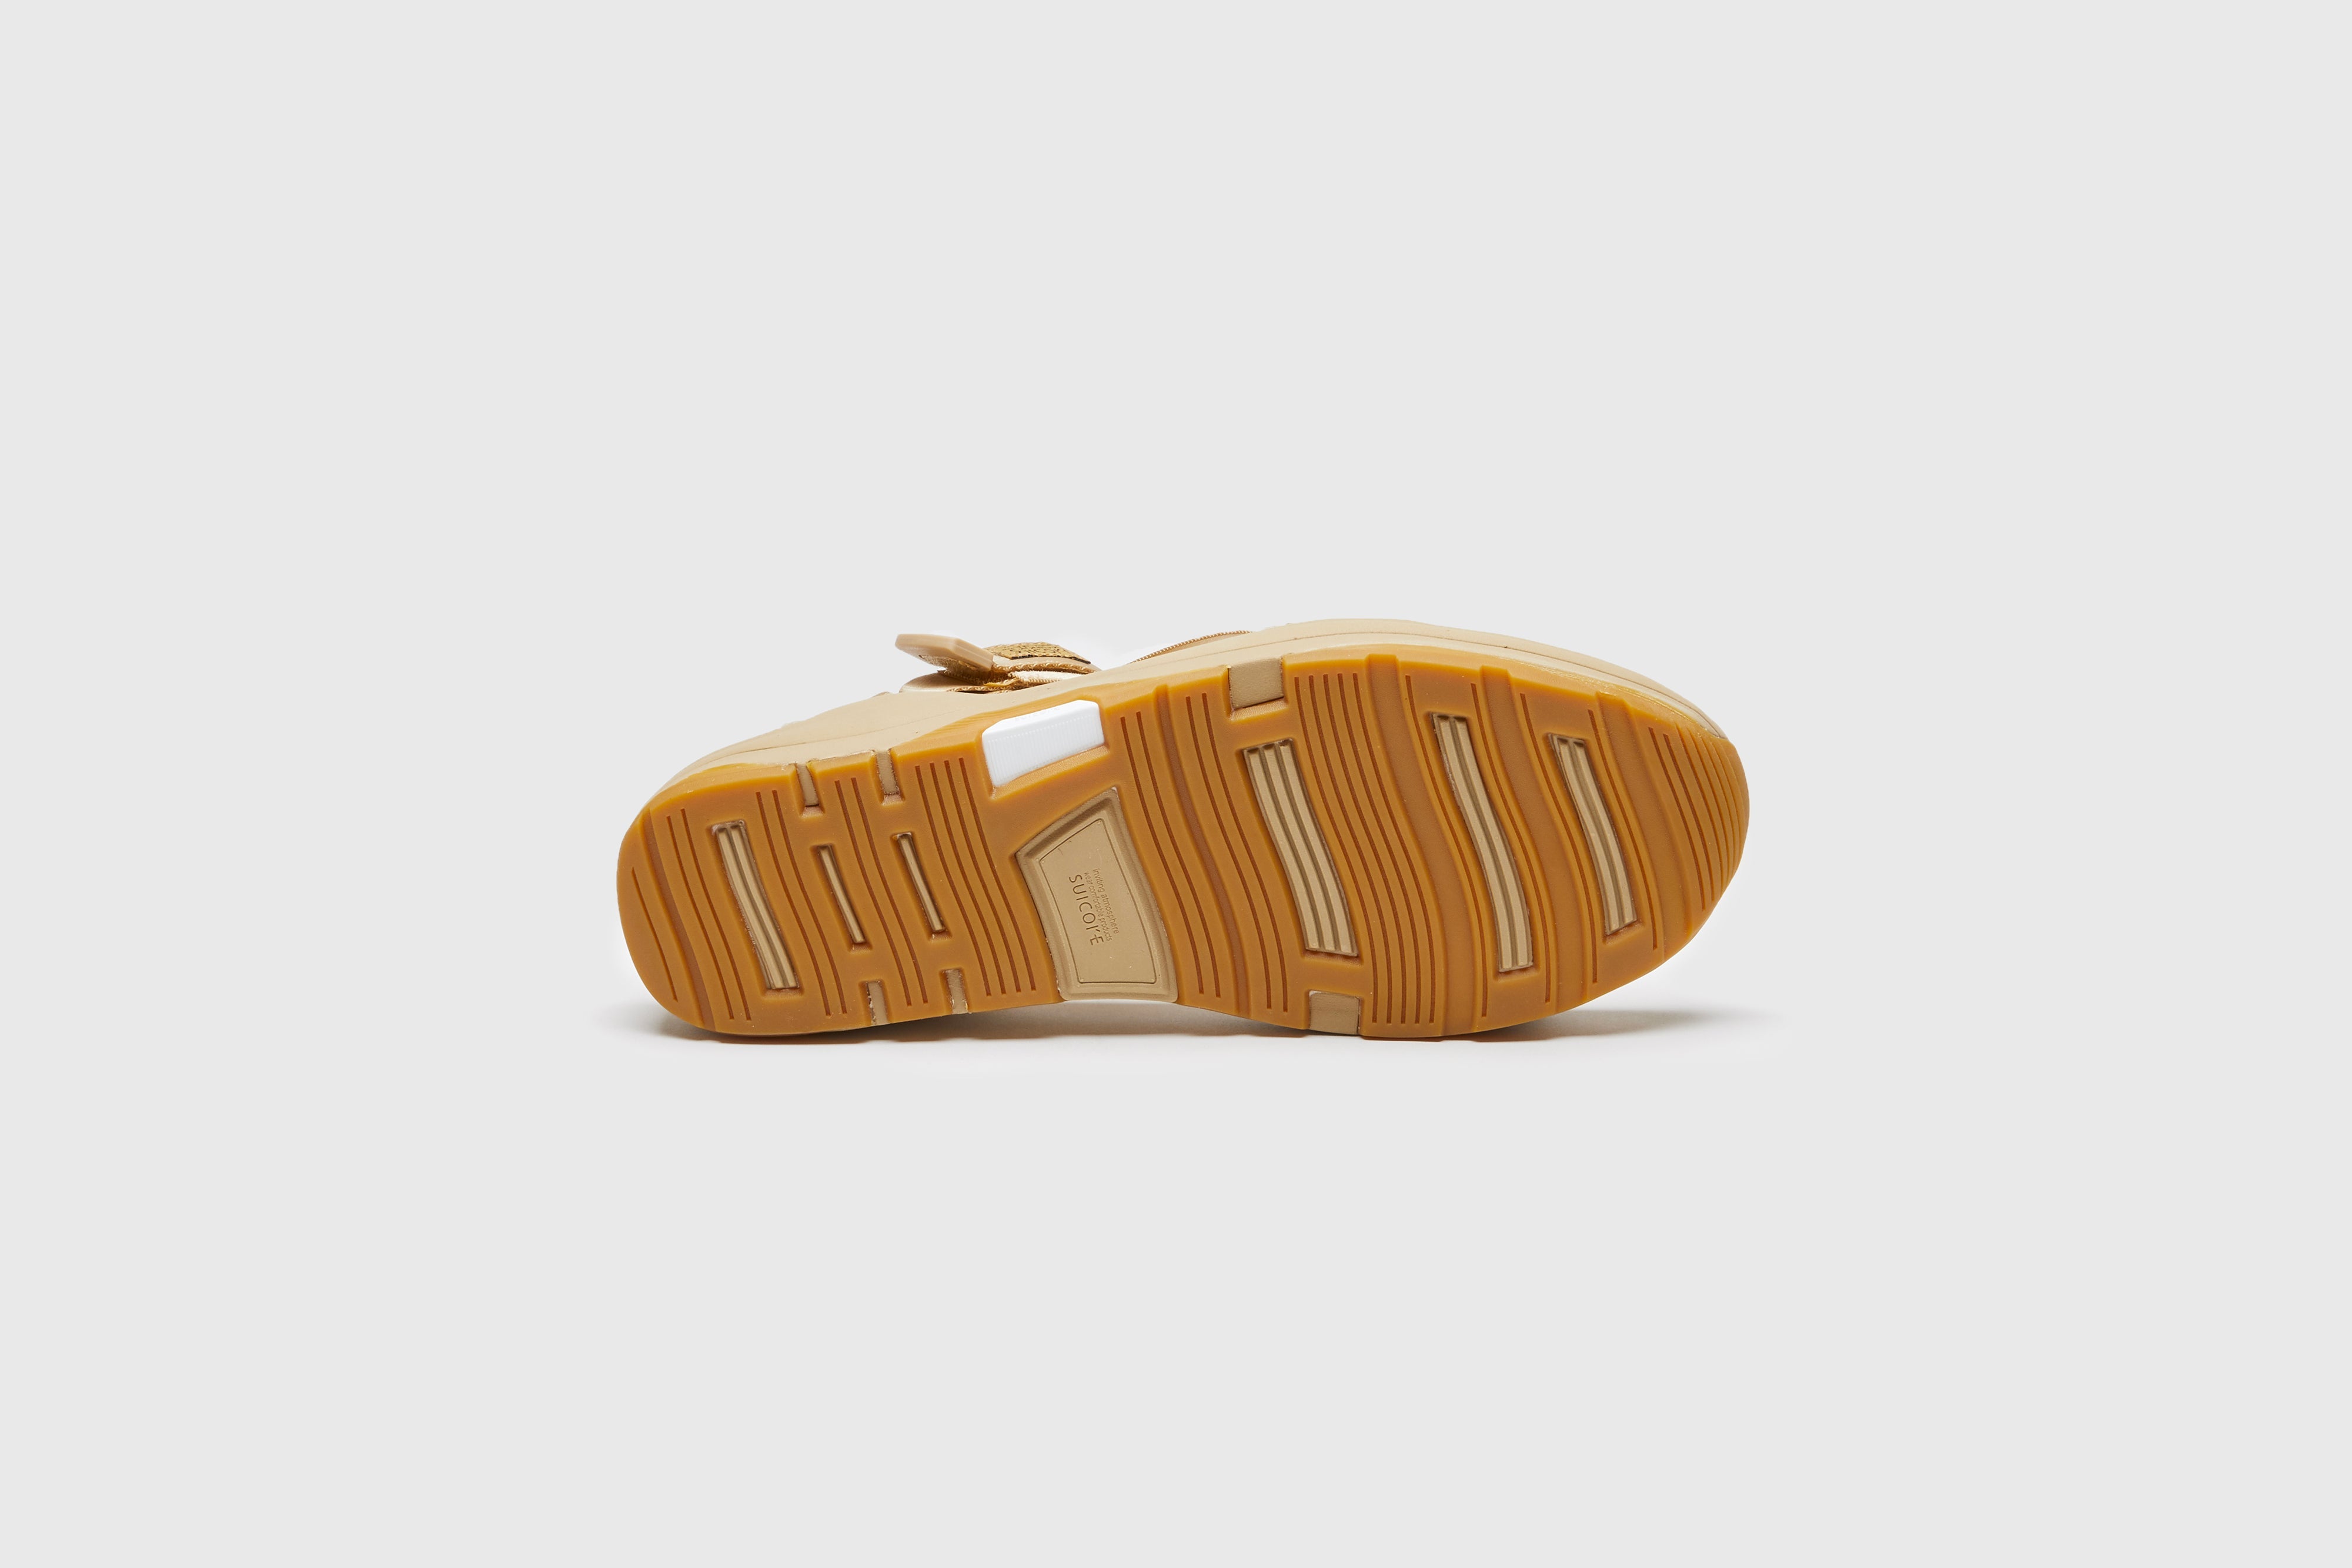 SUICOKE AKK-ab sneakers with brown & yellow nylon upper, brown & yellow midsole and sole, strap and logo patch. From Spring/Summer 2023 collection on eightywingold Web Store, an official partner of SUICOKE. OG-285AB BROWN X YELLOW